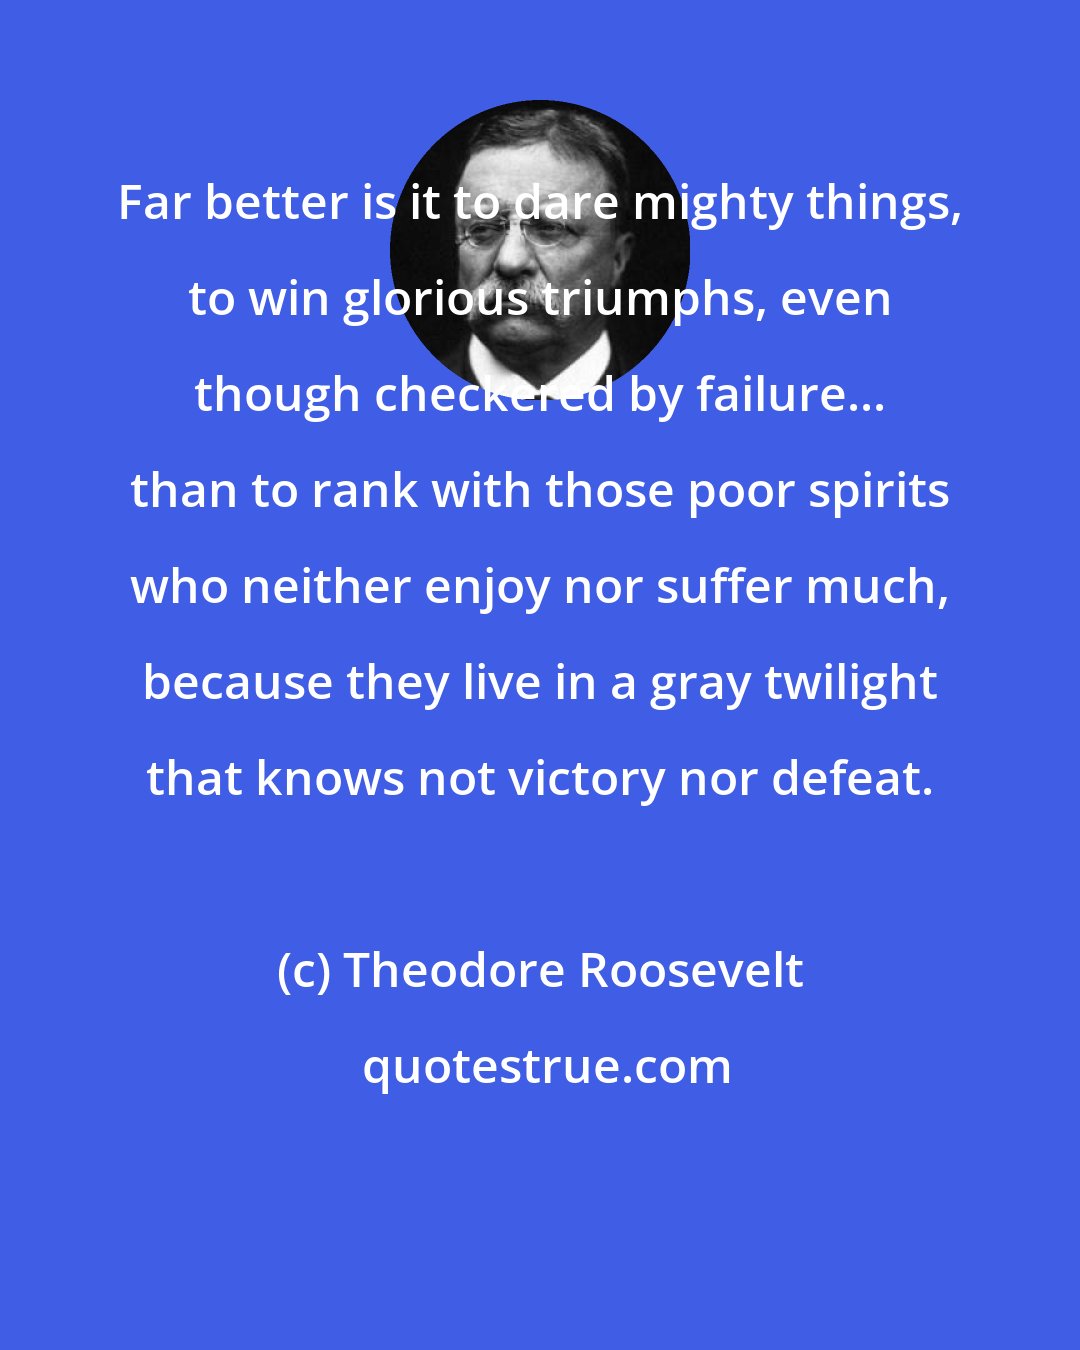 Theodore Roosevelt: Far better is it to dare mighty things, to win glorious triumphs, even though checkered by failure... than to rank with those poor spirits who neither enjoy nor suffer much, because they live in a gray twilight that knows not victory nor defeat.